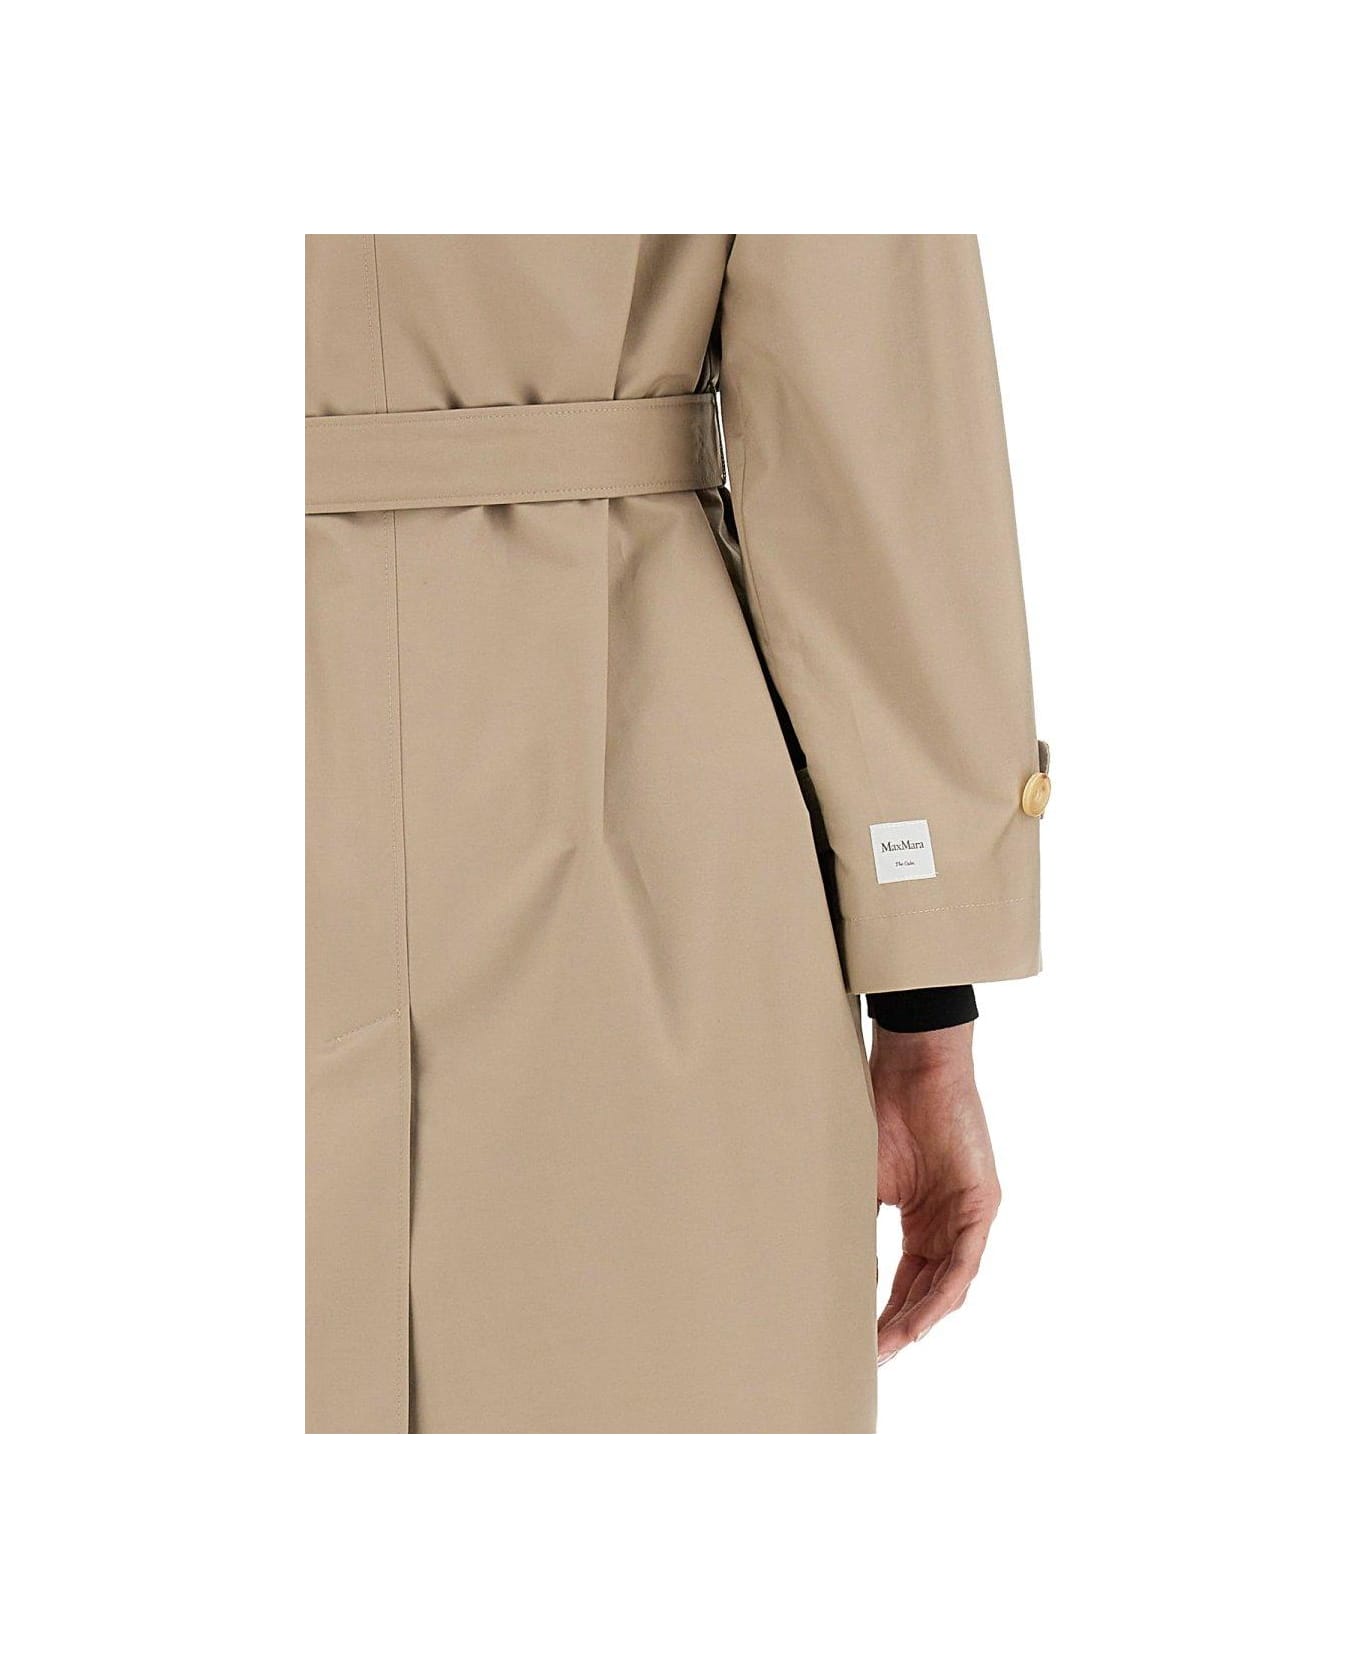 Max Mara The Cube Single-breasted Trench Coat - Beige コート